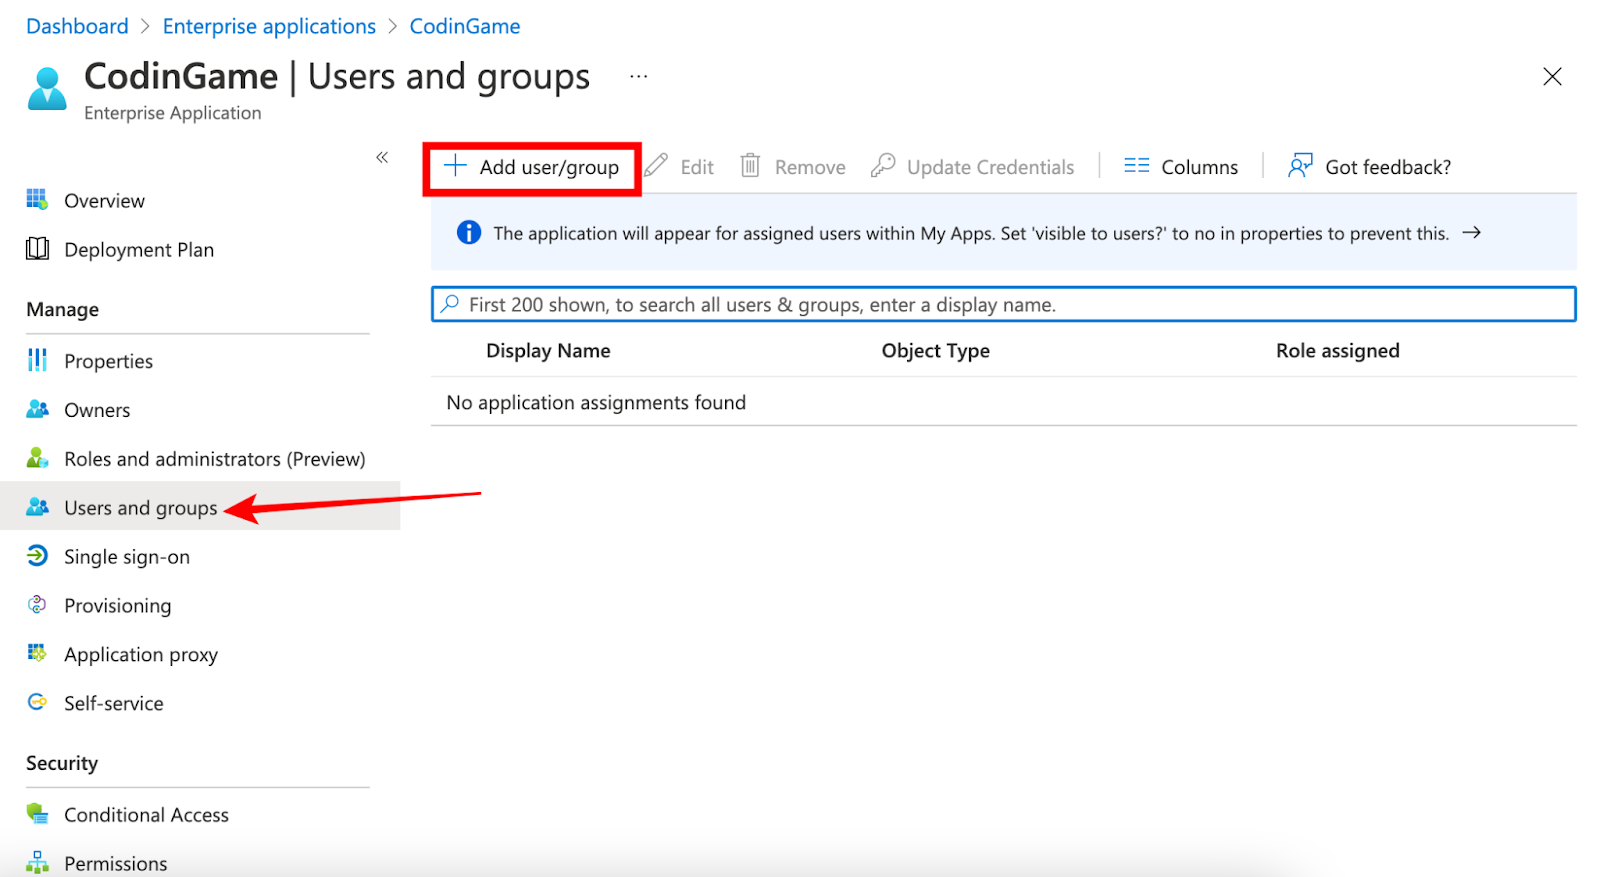 The "users and groups" page is shown with an arrow pointing to "users and groups" link in the left nav. At the top center of the screen the "Add user/group" button is highlighted.